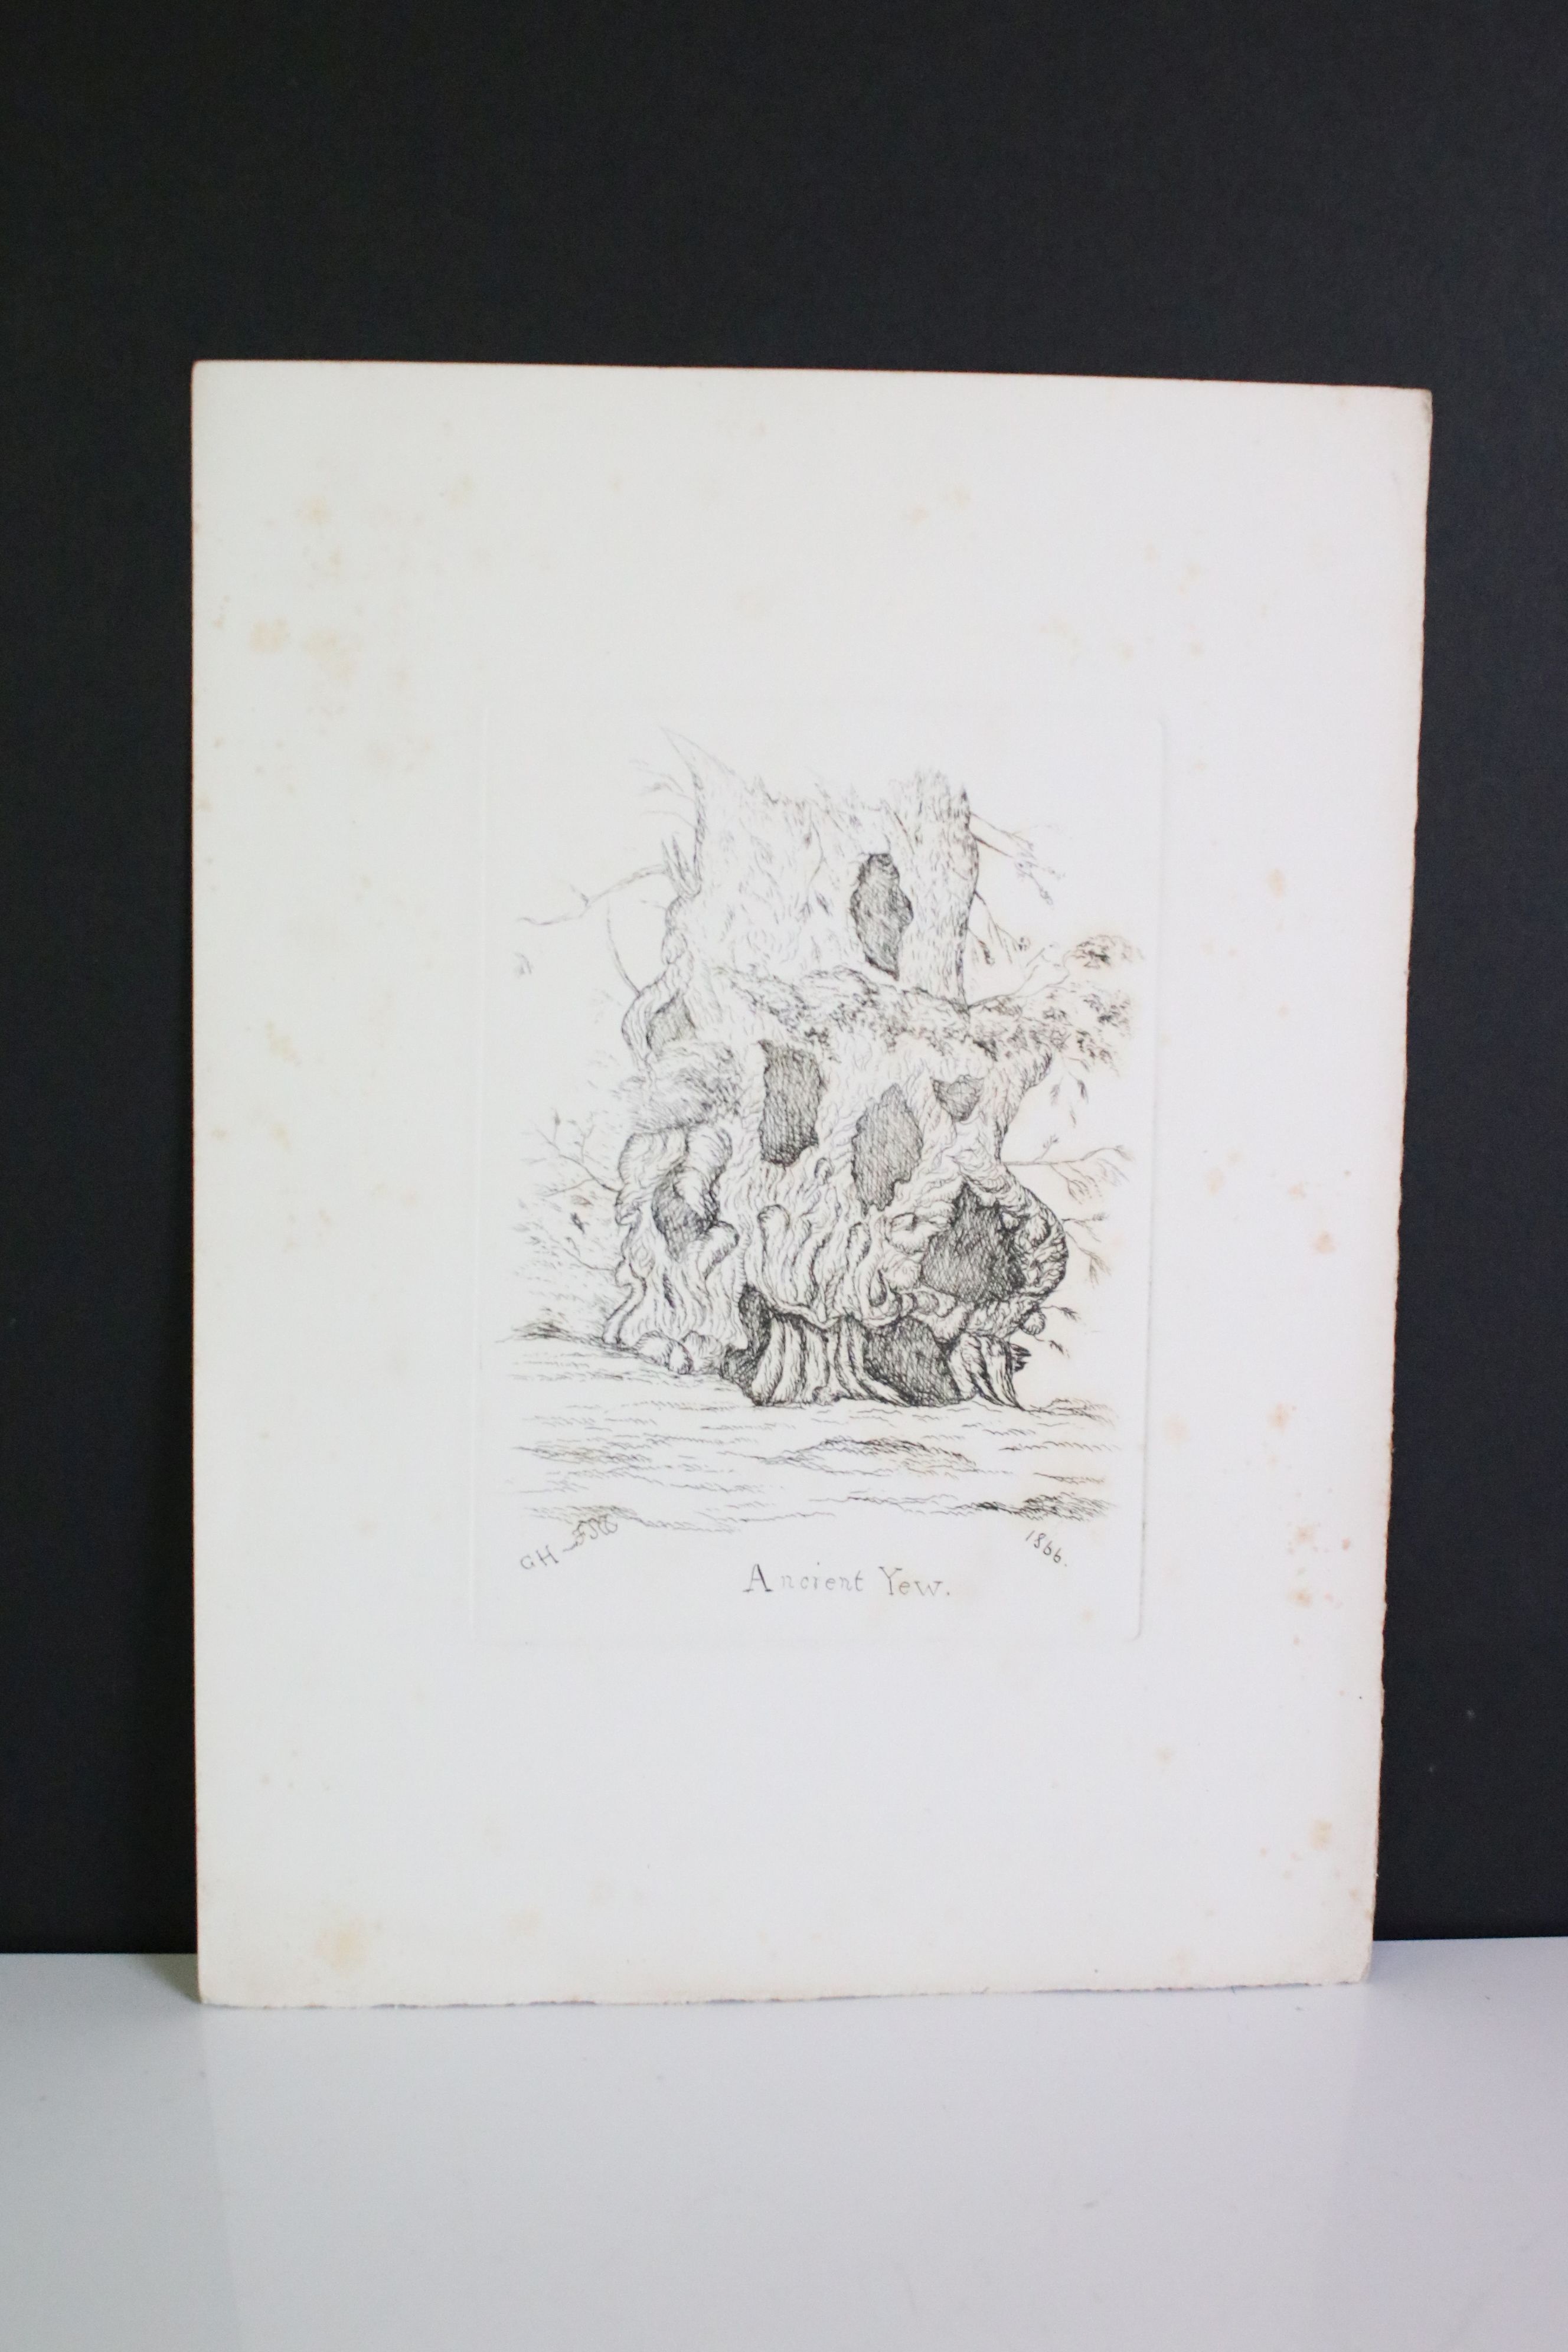 Approximately Twenty 19th century Pen and Ink / Etchings, some comical, all with monogrammed - Image 9 of 9